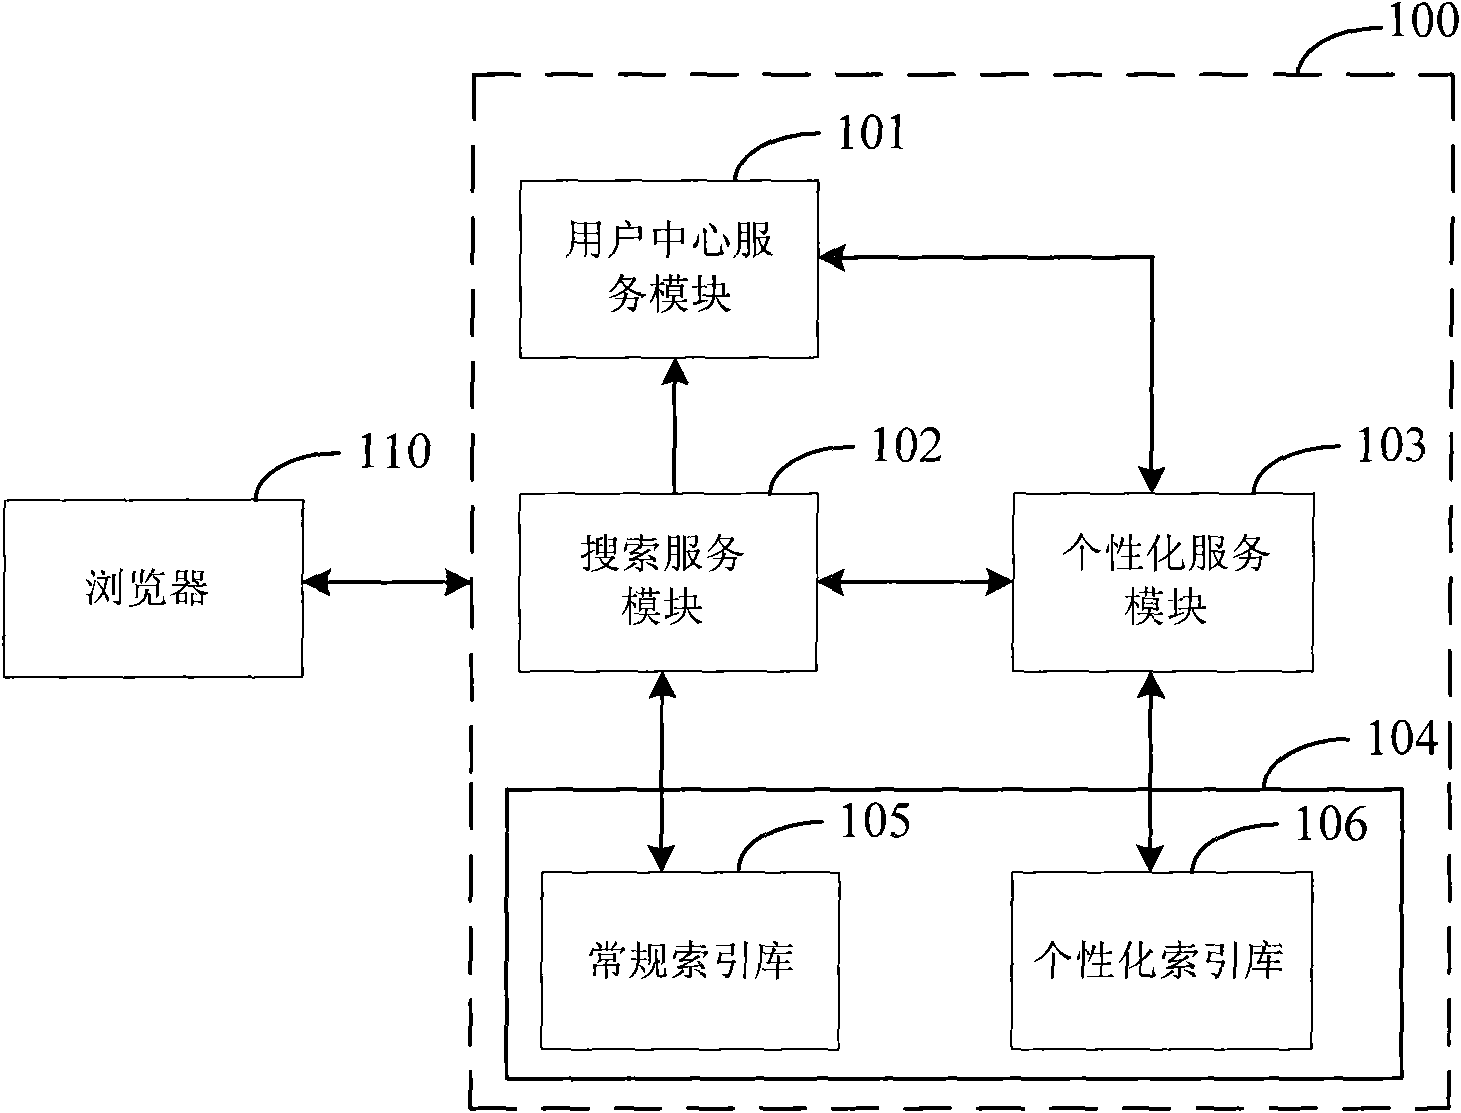 Searching system and implementation method thereof